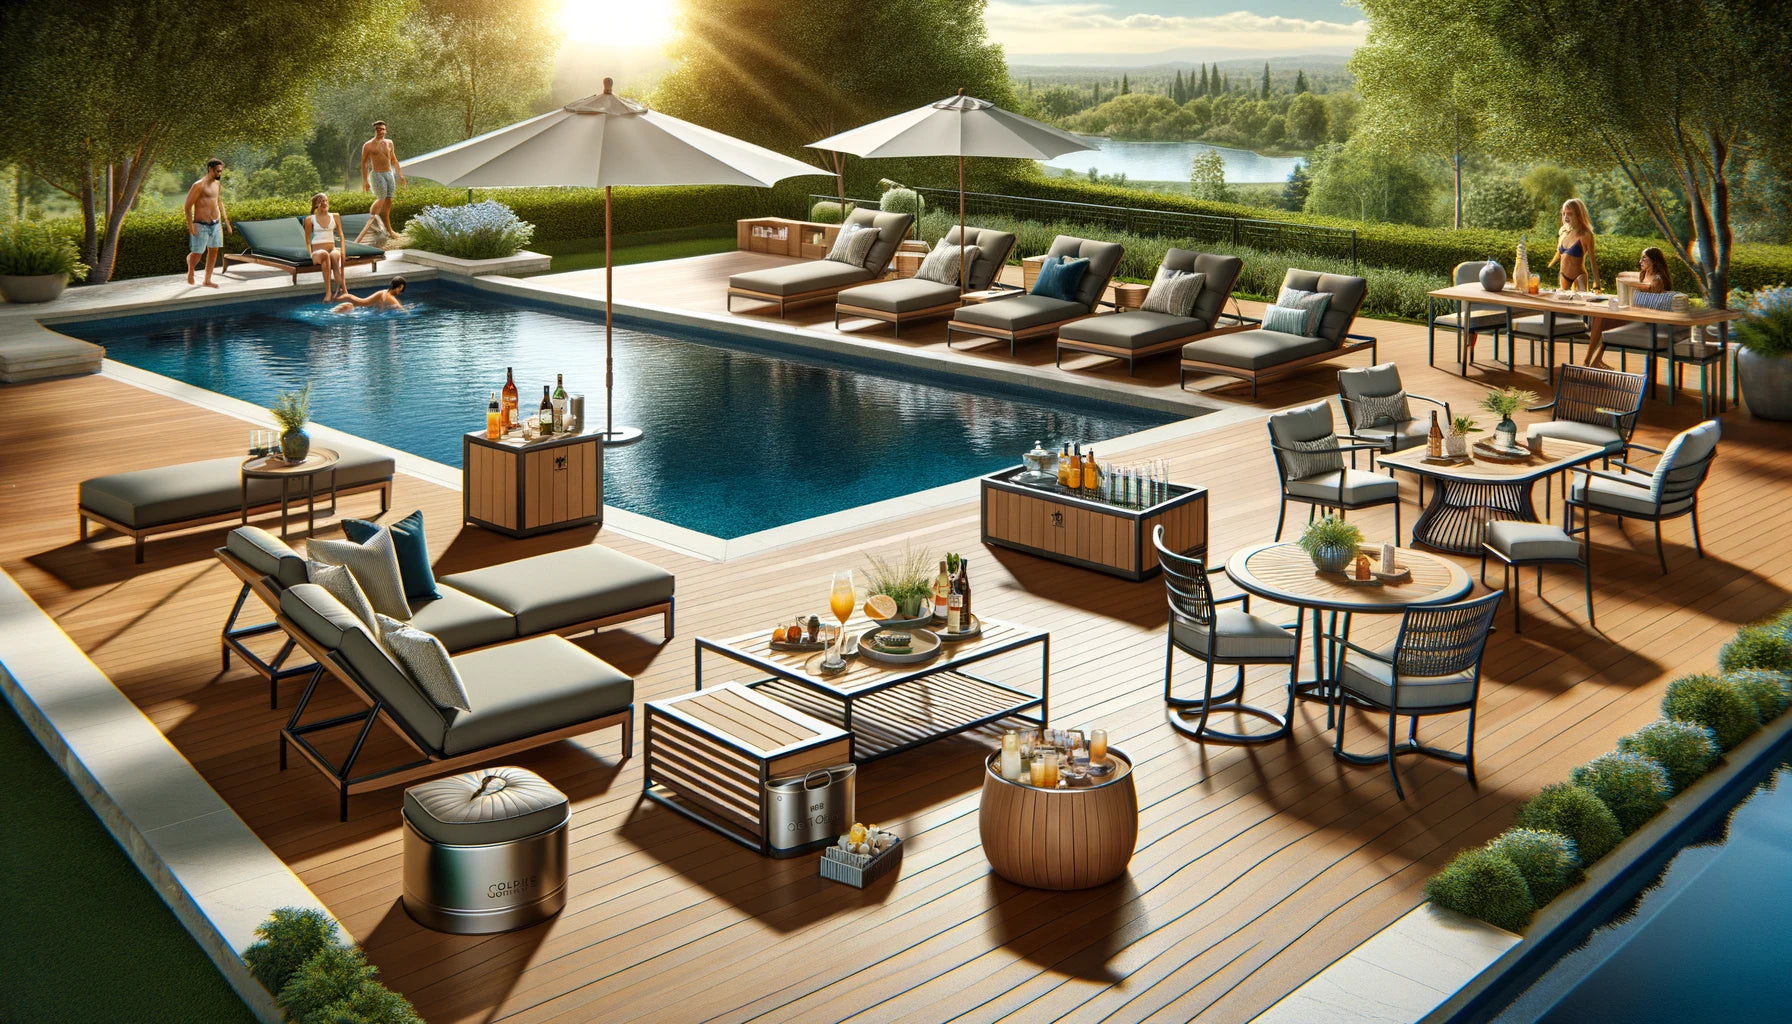 Transform Your Pool Area with Stunning Outdoor Furniture